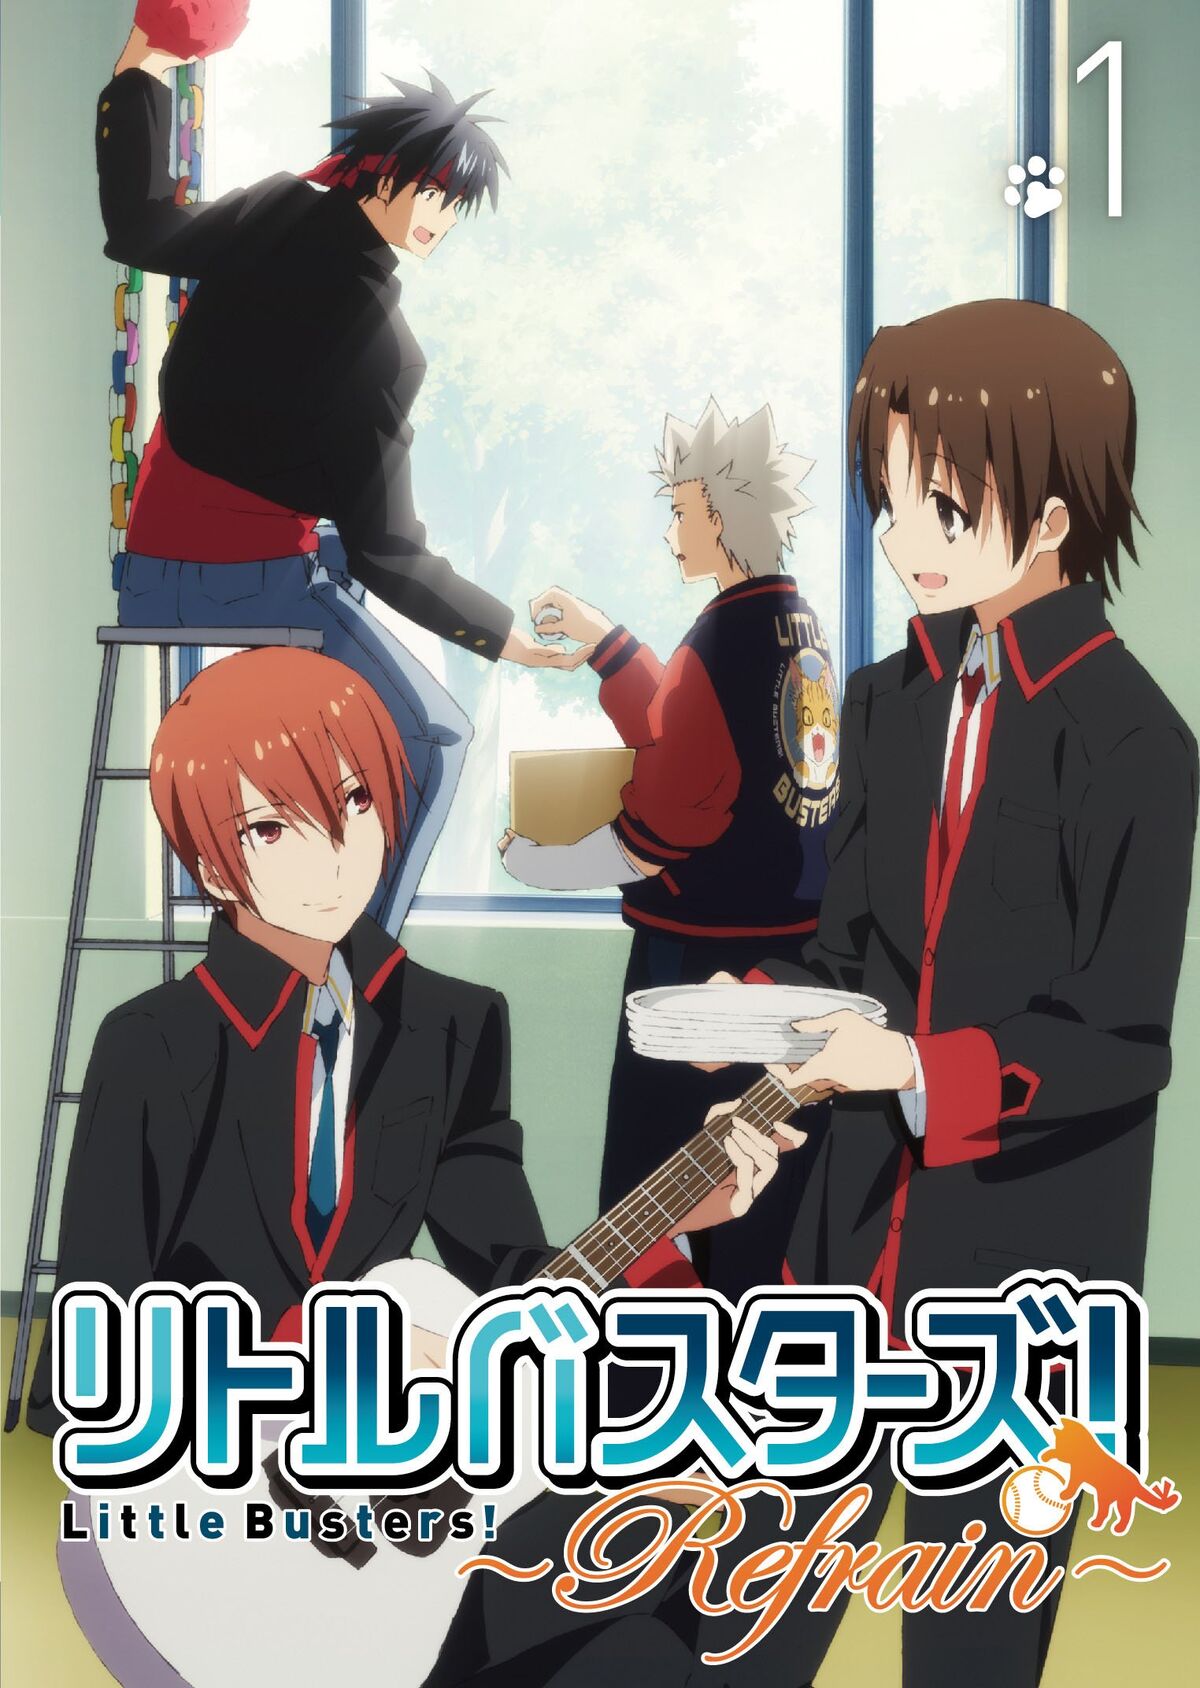 Episode 14 - So I'll Reach Out For Your Hand, Little Busters! Wiki